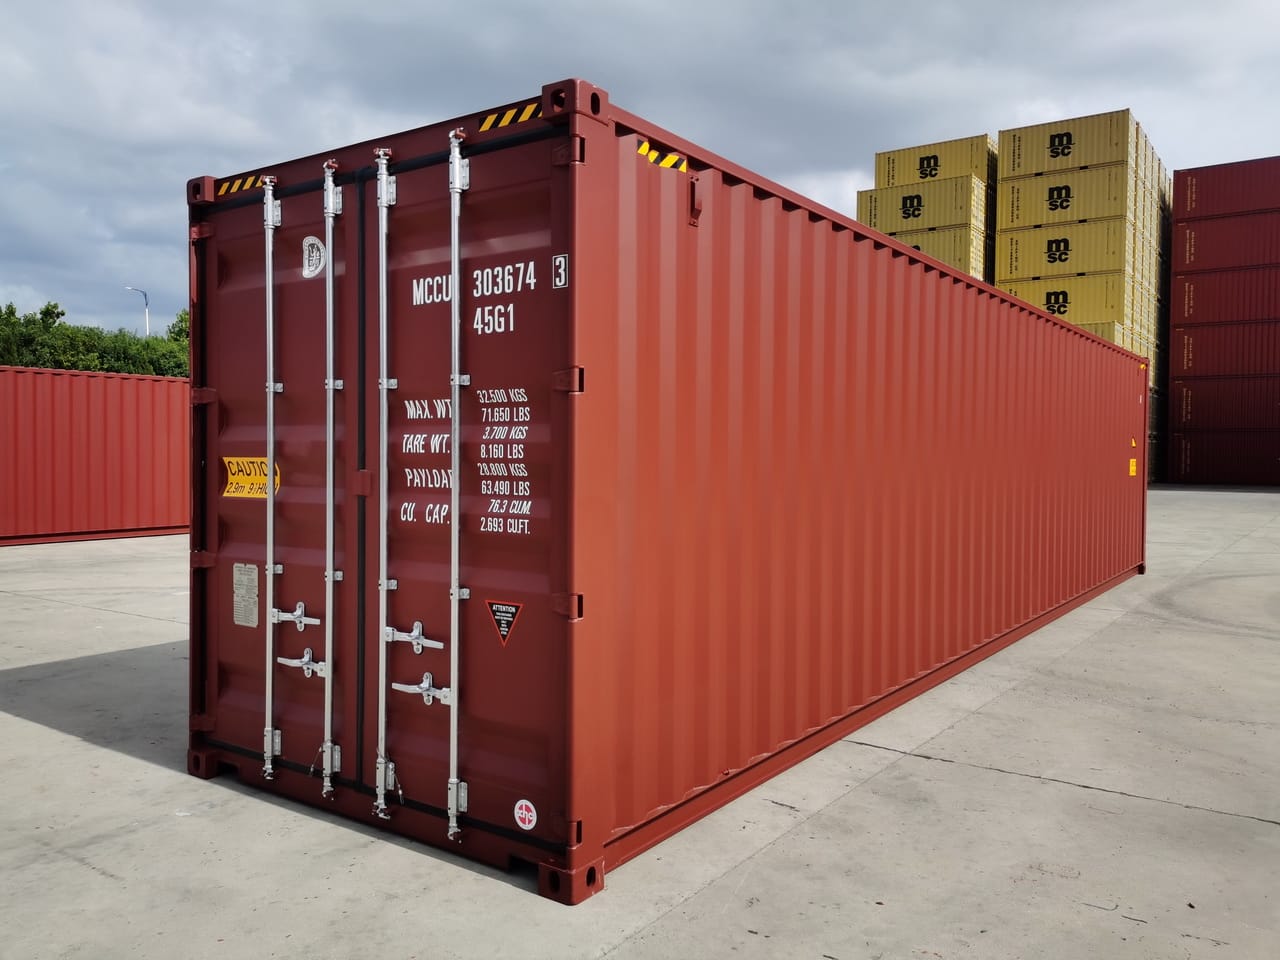 This is a Storage Shipping Container in Brisbane